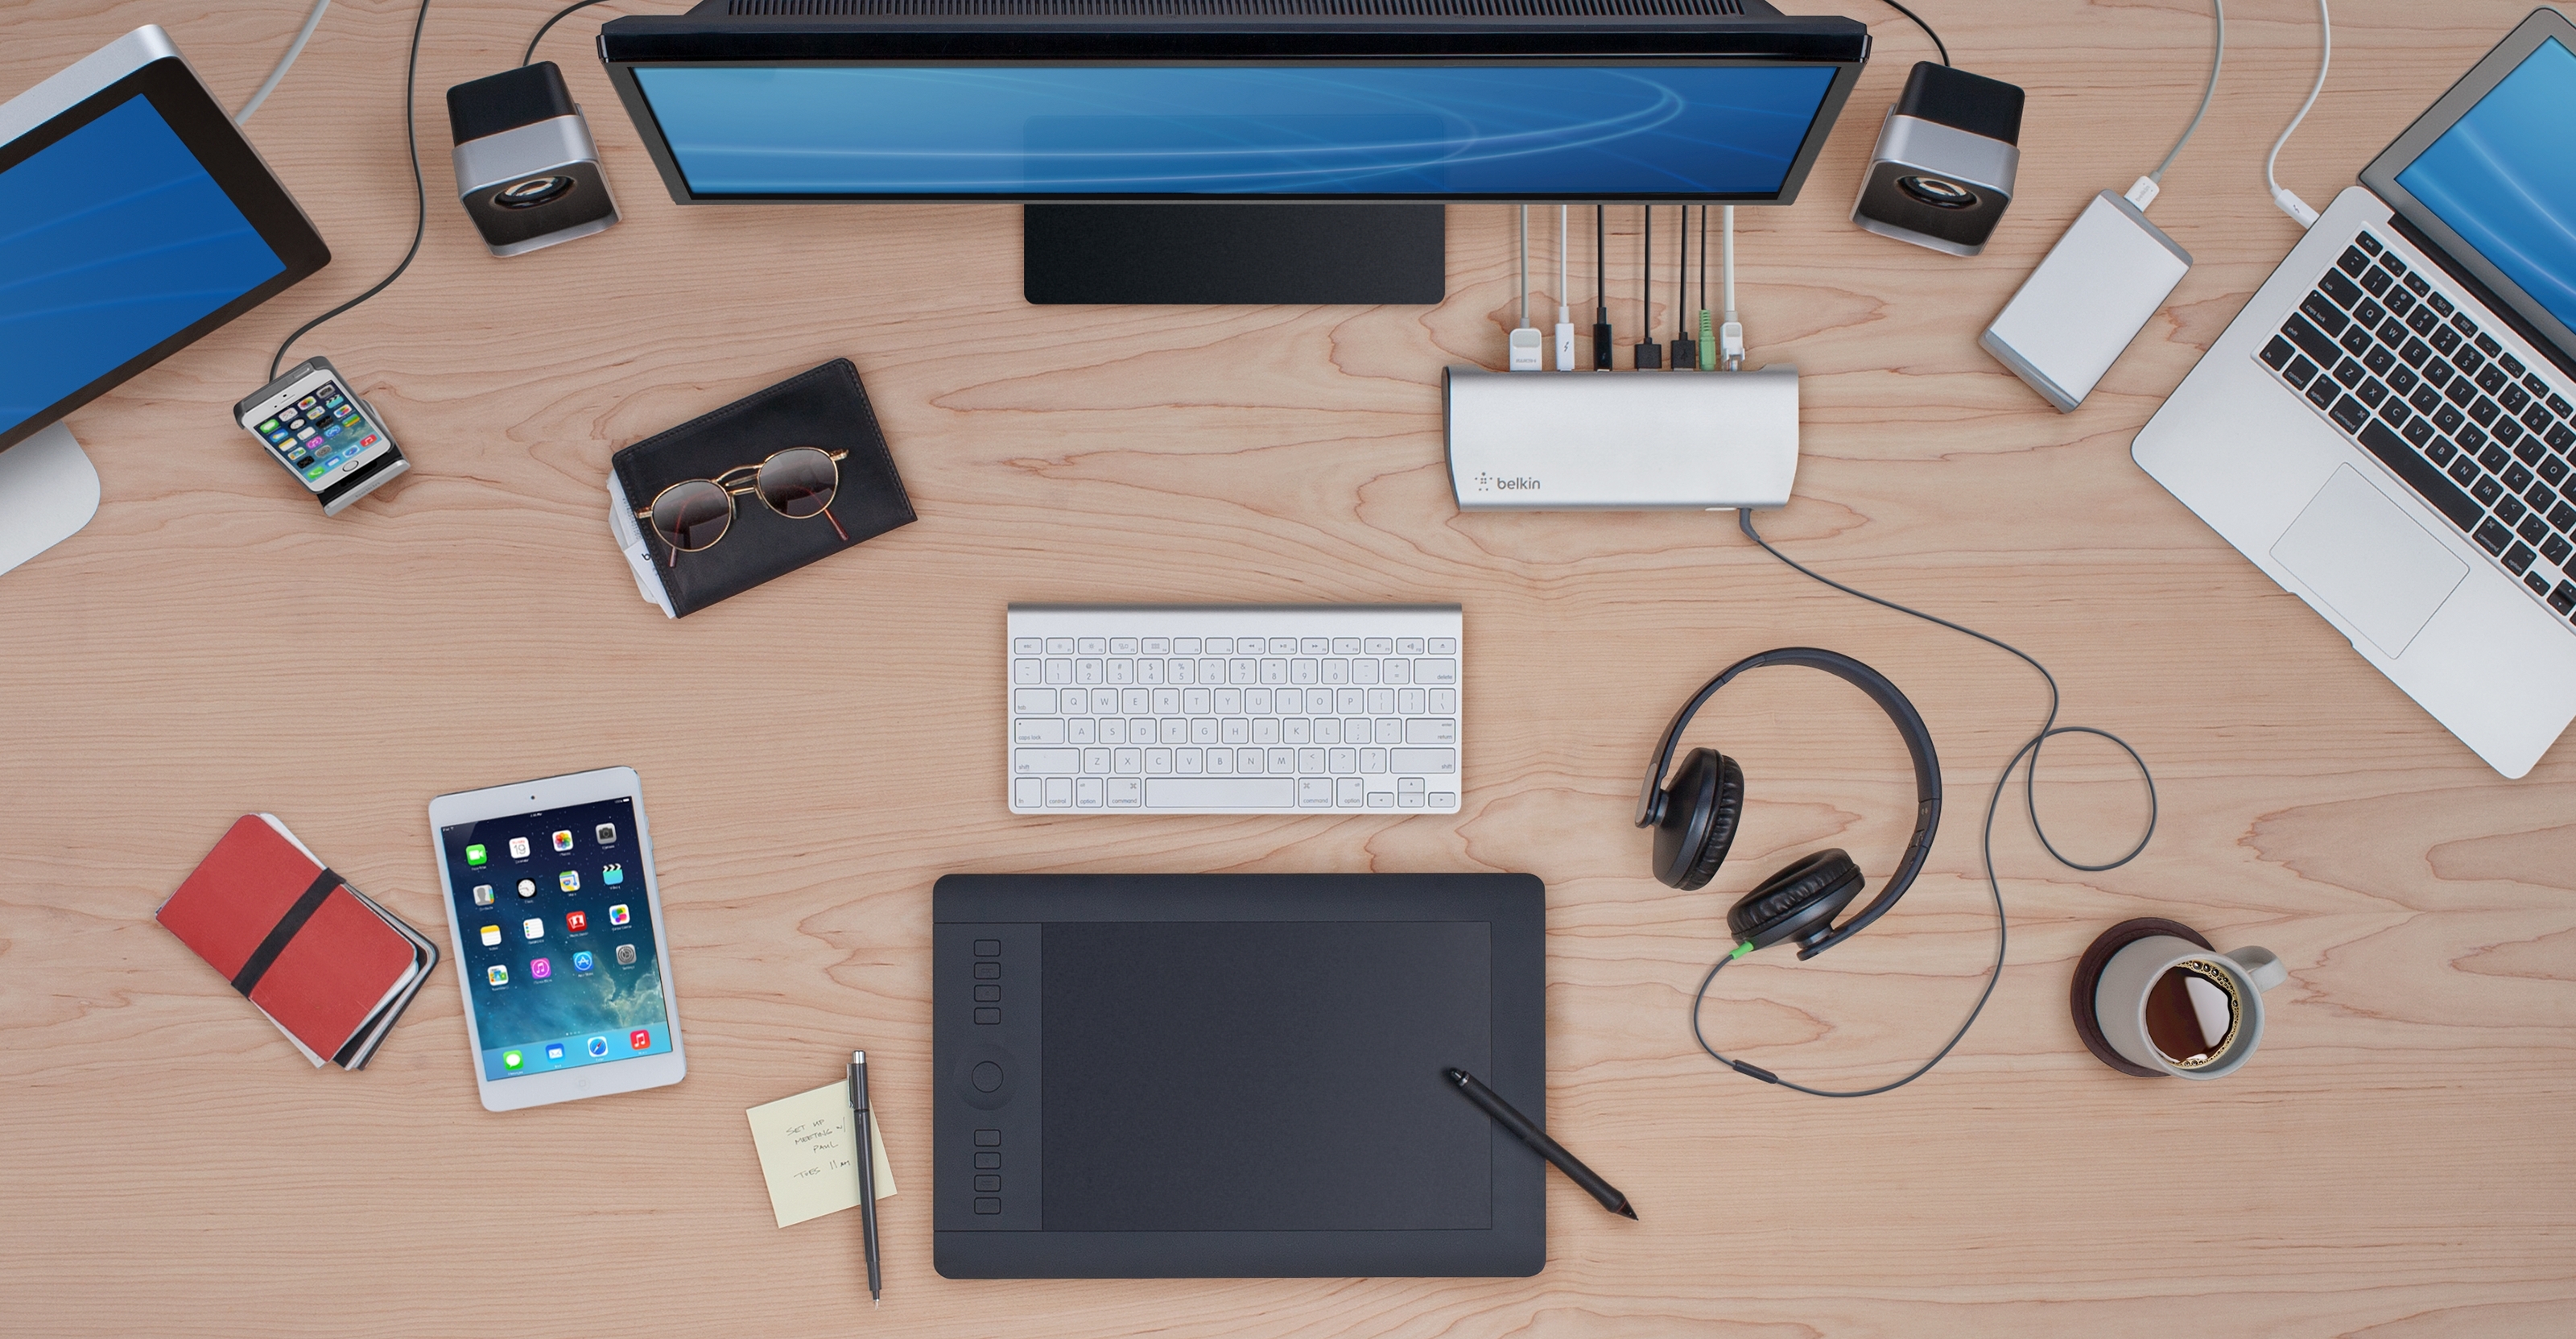 Belkin Announces New Thunderbolt™ 2 Express Dock HD for Mac® and PC  Computers | Business Wire